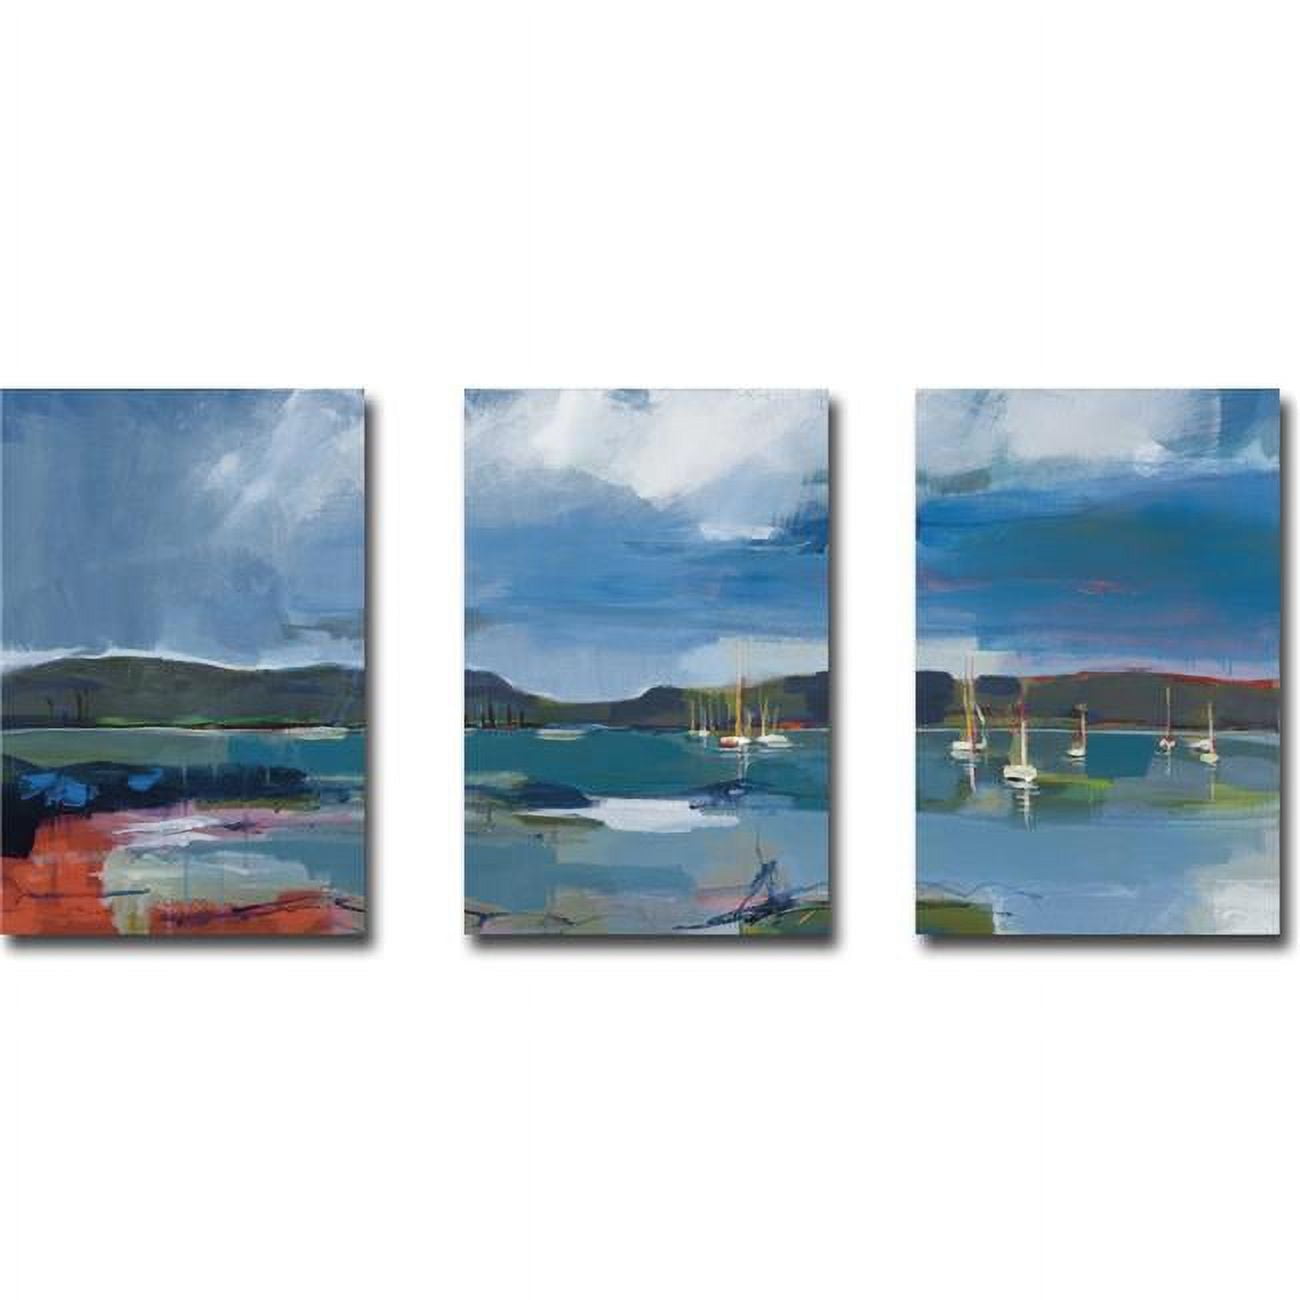 1624l602cg Coastal Display I, Ii, & Iii By A. Fitsimmons 3 Piece Premium Gallery-wrapped Canvas Giclee Art Set - 16 X 24 X 1.5 In.